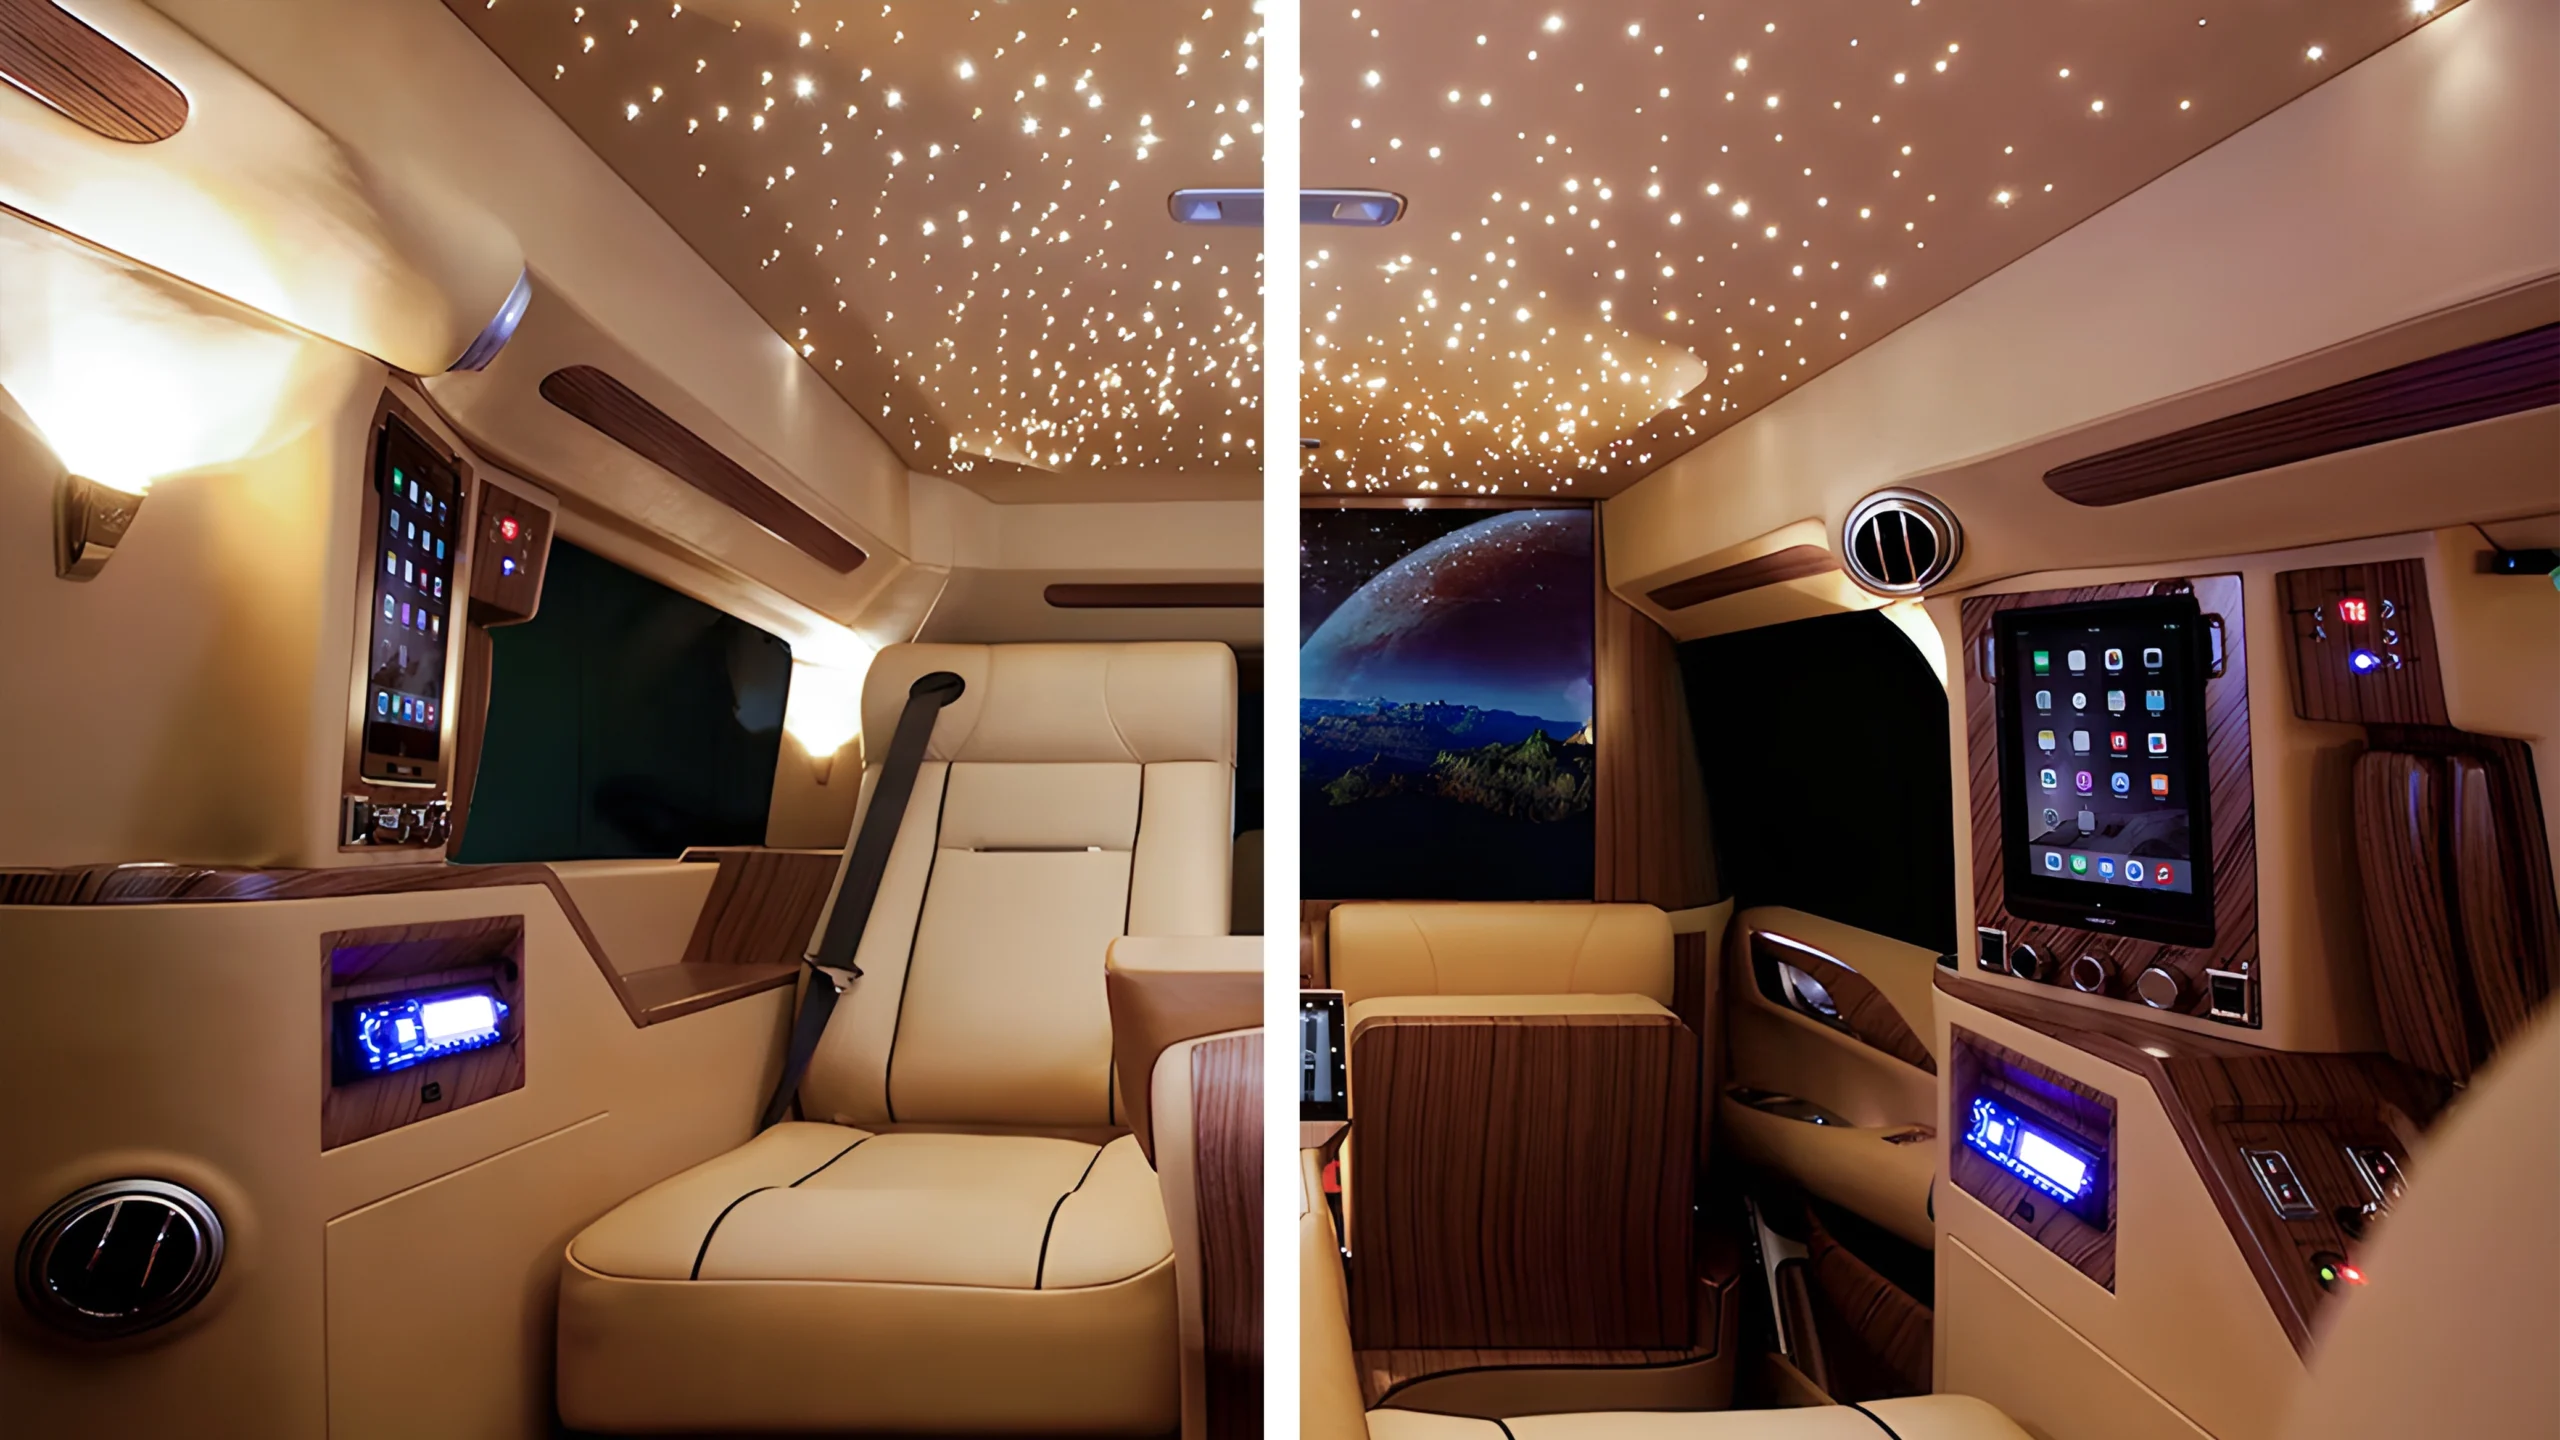 Luxury car interior with starlit ceiling and modern tech.